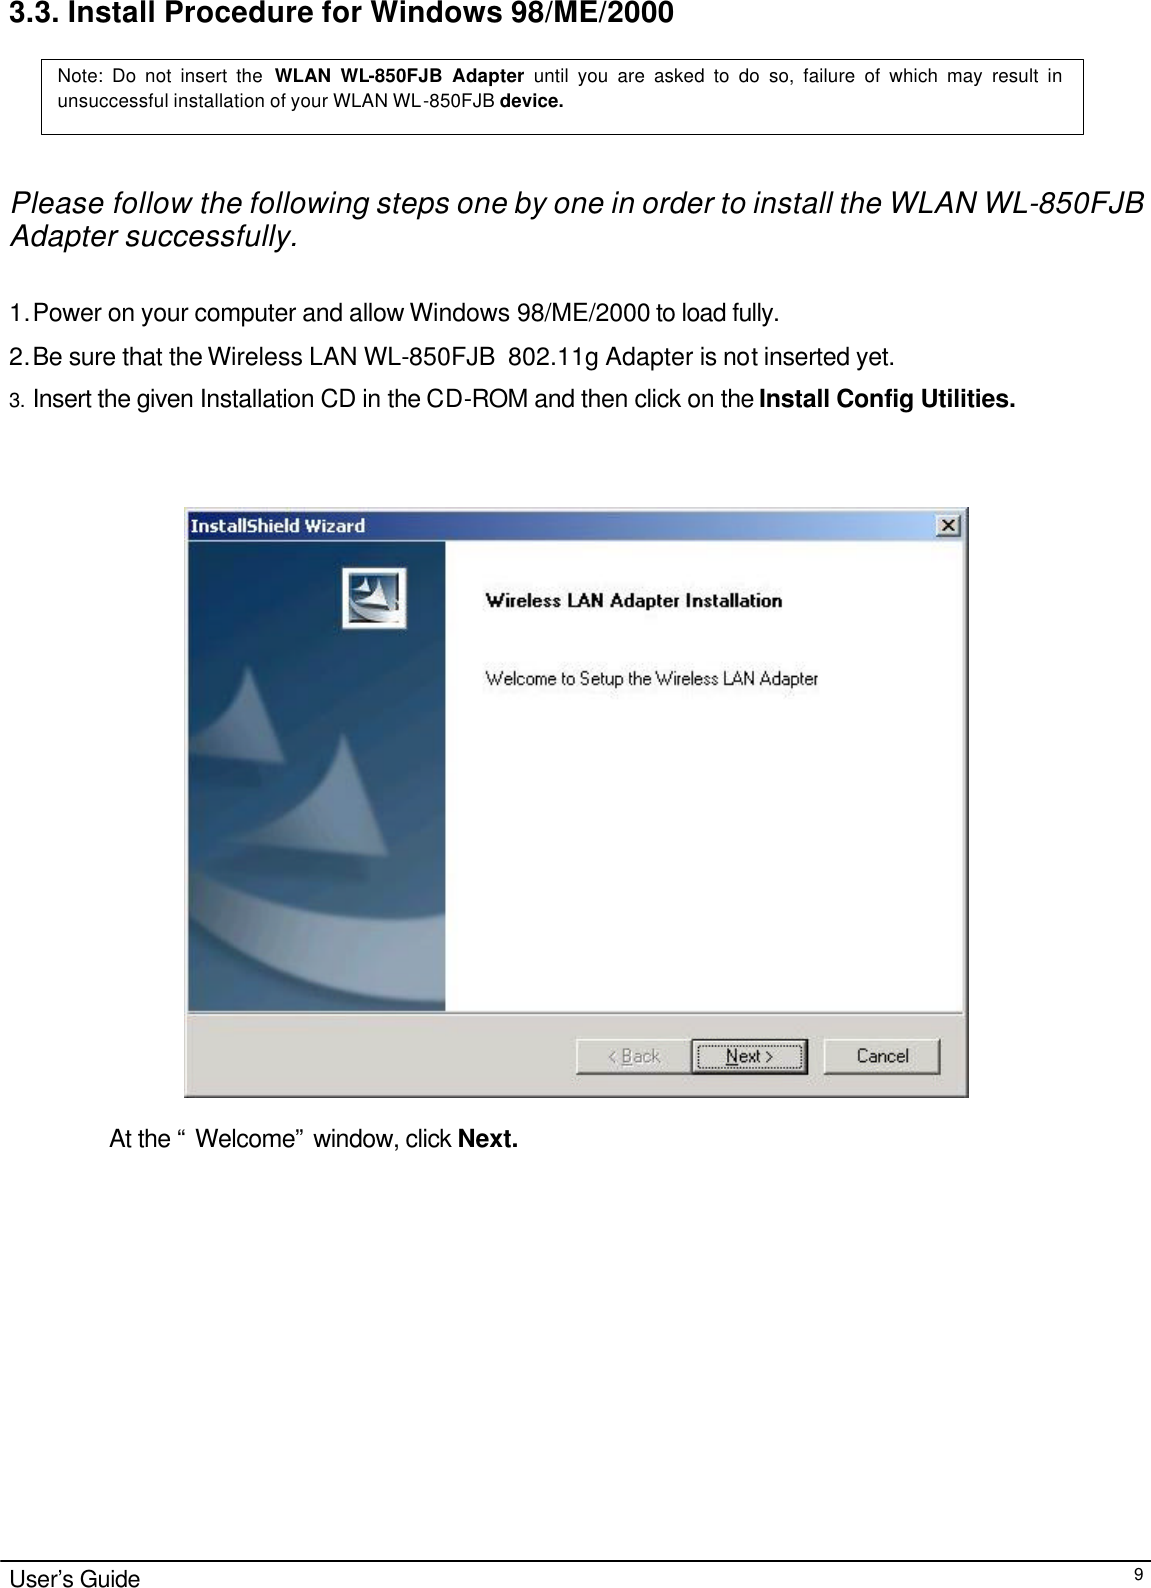                                                                                                                                                                                                                                                                                                                                        User’s Guide  93.3. Install Procedure for Windows 98/ME/2000    Please follow the following steps one by one in order to install the WLAN WL-850FJB  Adapter successfully.  1. Power on your computer and allow Windows 98/ME/2000 to load fully. 2. Be sure that the Wireless LAN WL-850FJB  802.11g Adapter is not inserted yet.  3. Insert the given Installation CD in the CD-ROM and then click on the Install Config Utilities.     At the “ Welcome” window, click Next.         Note: Do not insert the WLAN WL-850FJB Adapter until you are asked to do so, failure of which may result in unsuccessful installation of your WLAN WL-850FJB device. 